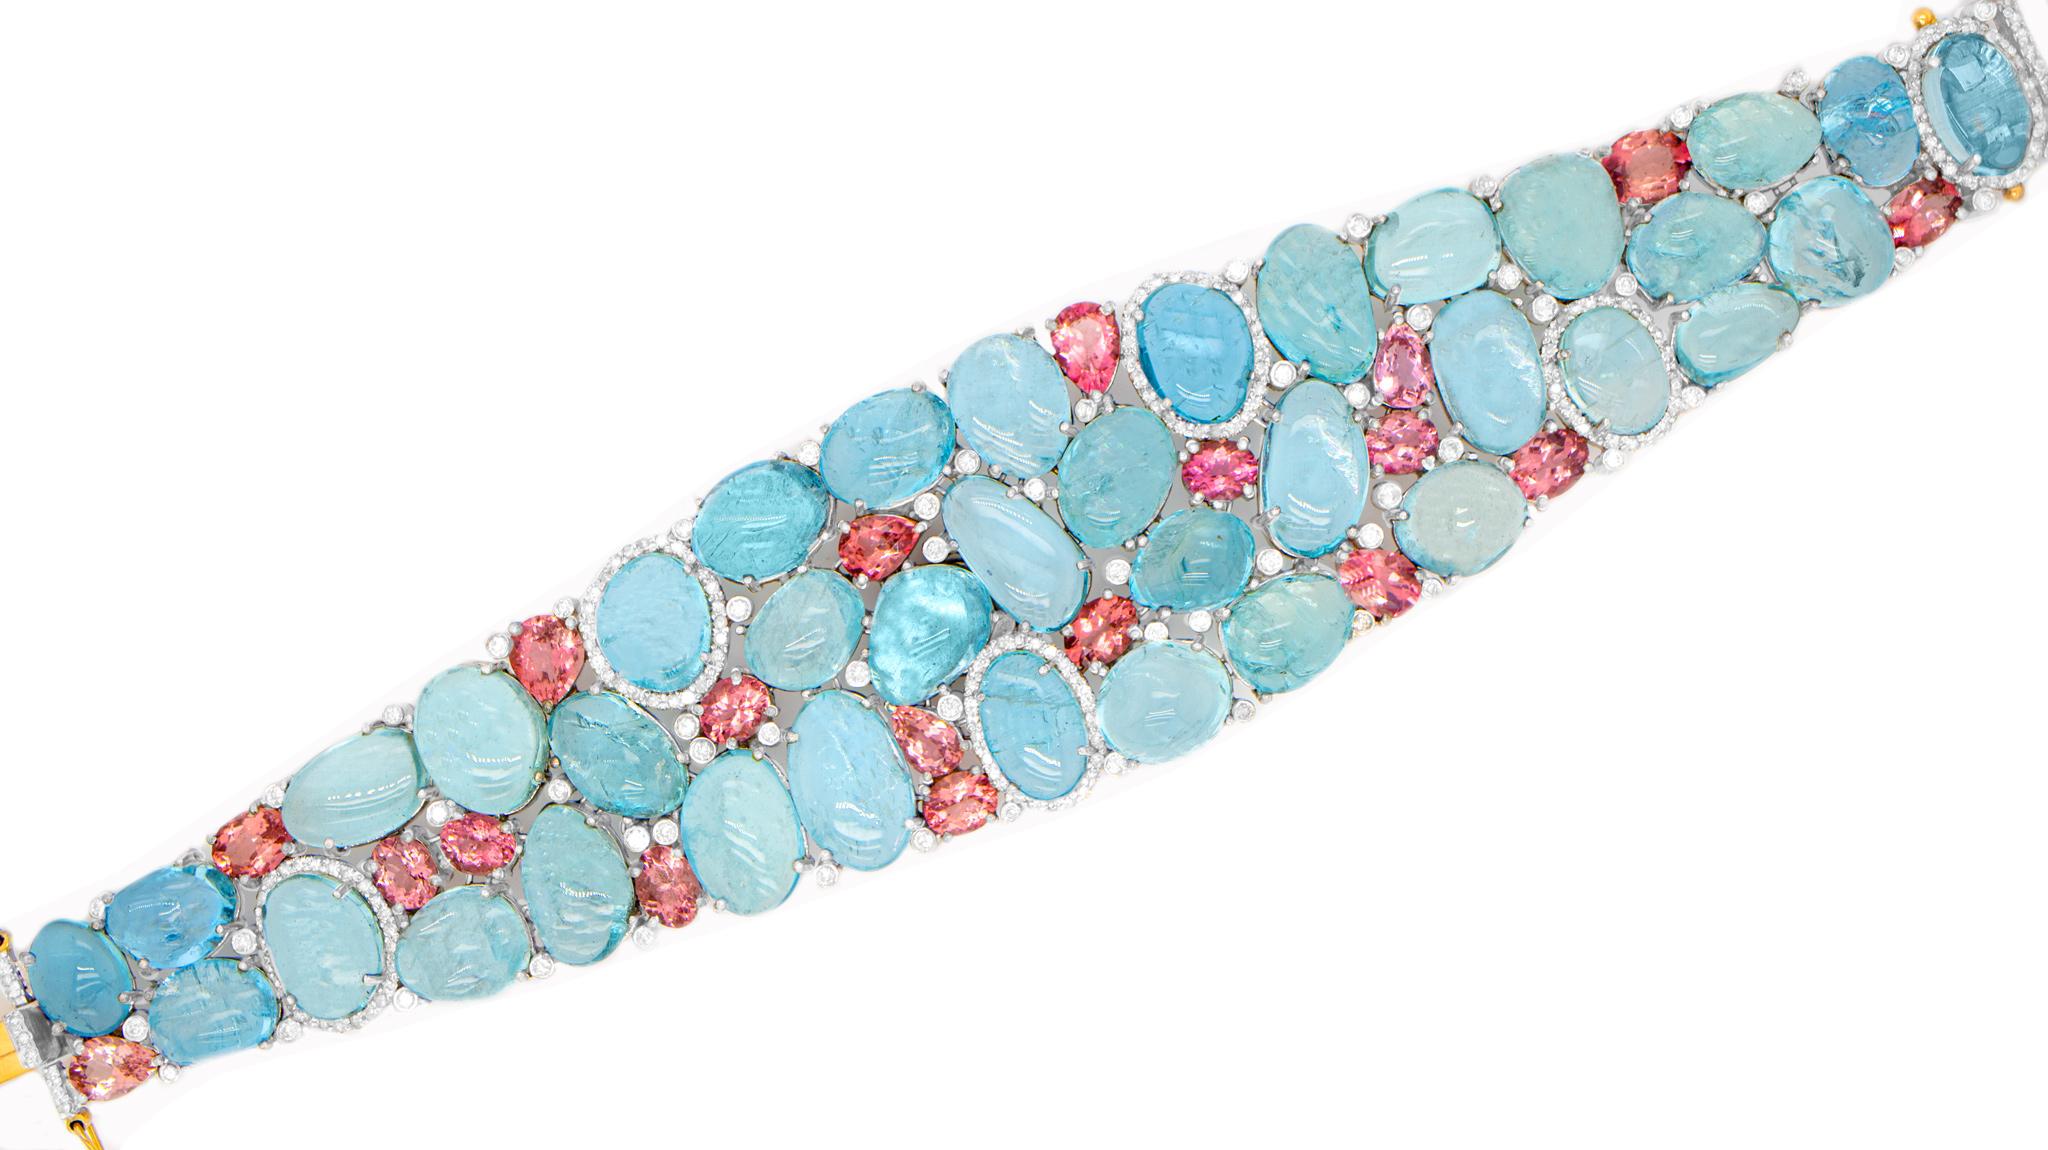 Cabochon Aquamarine 90 Carats Total Bracelet with Pink Sapphires and Diamonds Silver Gold